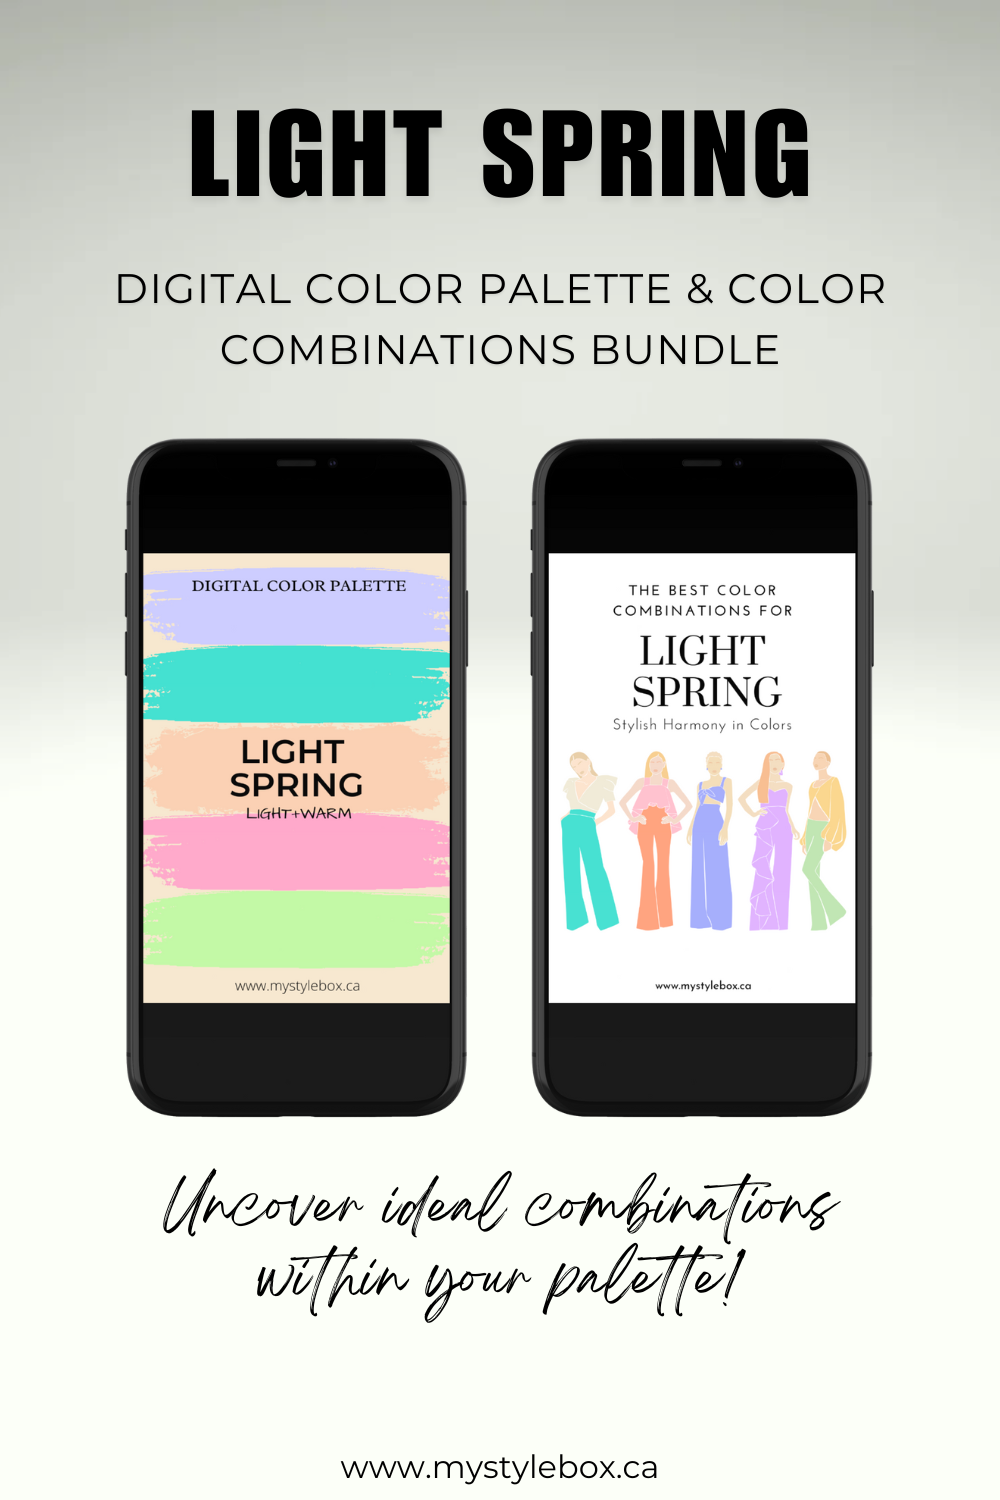 Light Spring Digital Color Palette and Color Combinations